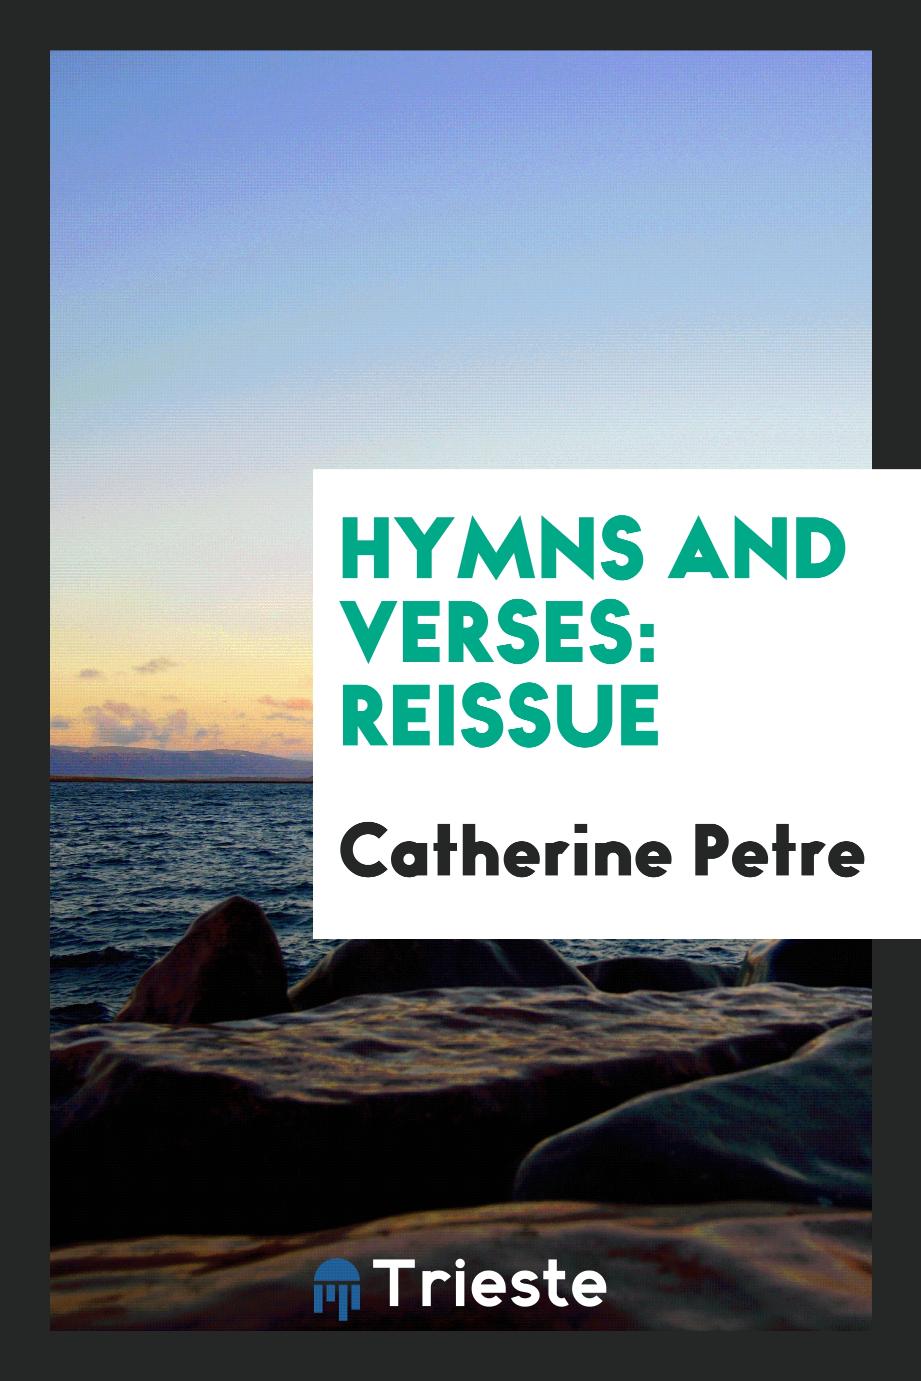 Hymns and Verses: Reissue